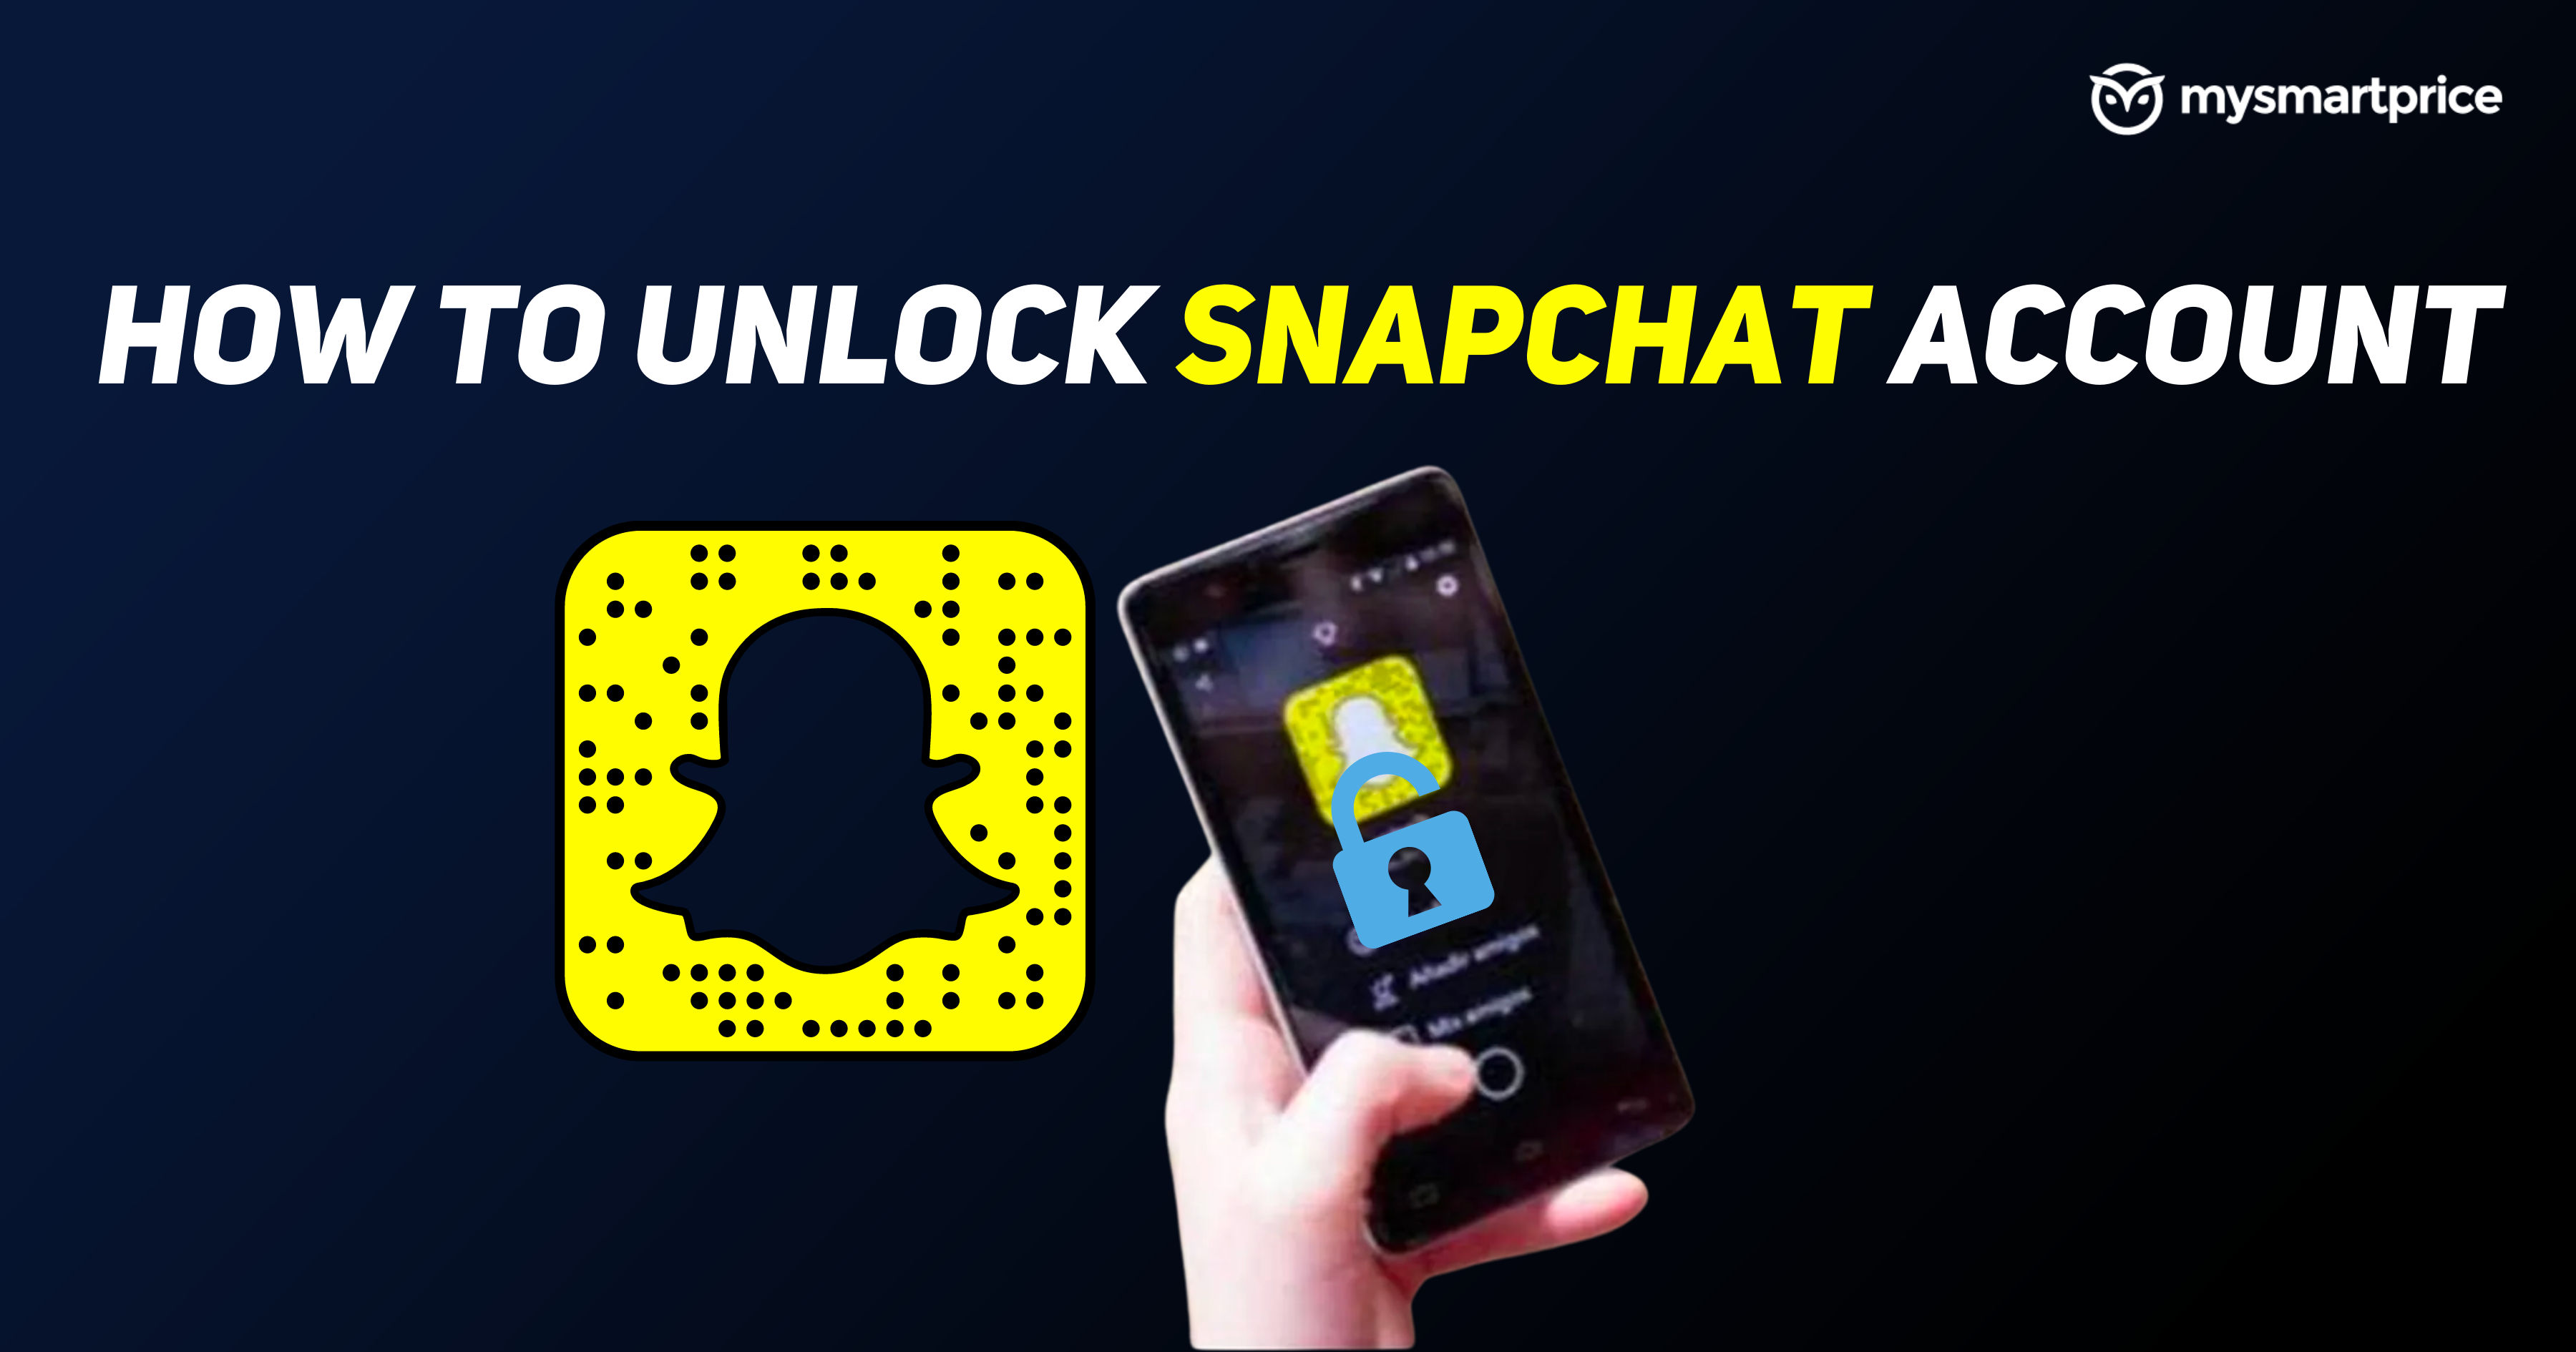 Snapchat Account Locked? Here's How to Unlock Snapchat Using Different